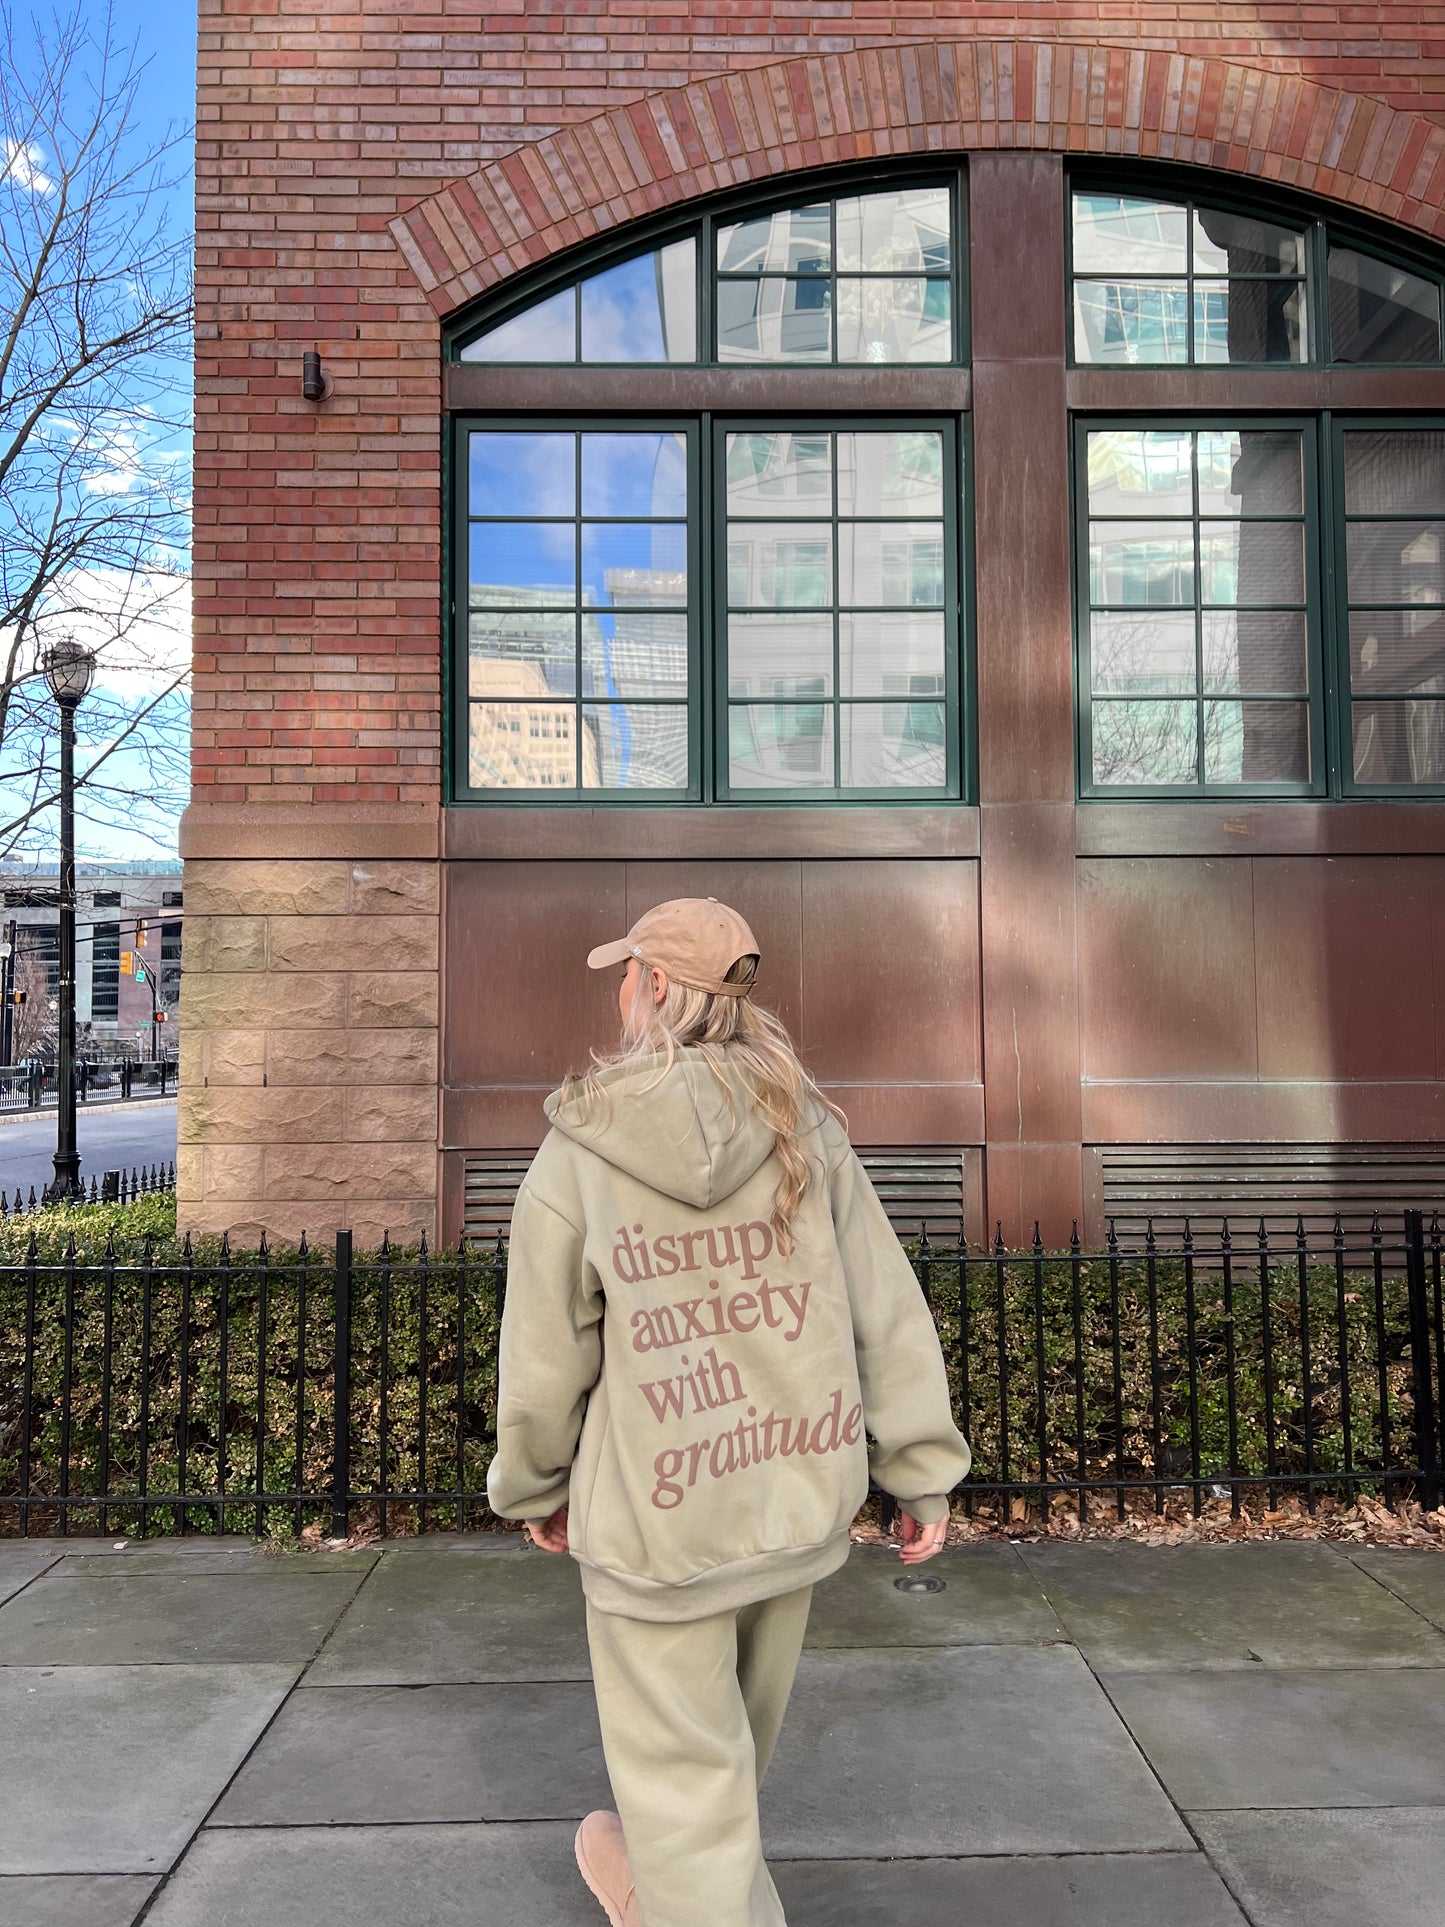 Disrupt Anxiety with Gratitude Zip-up Hoodie - Dusty Olive